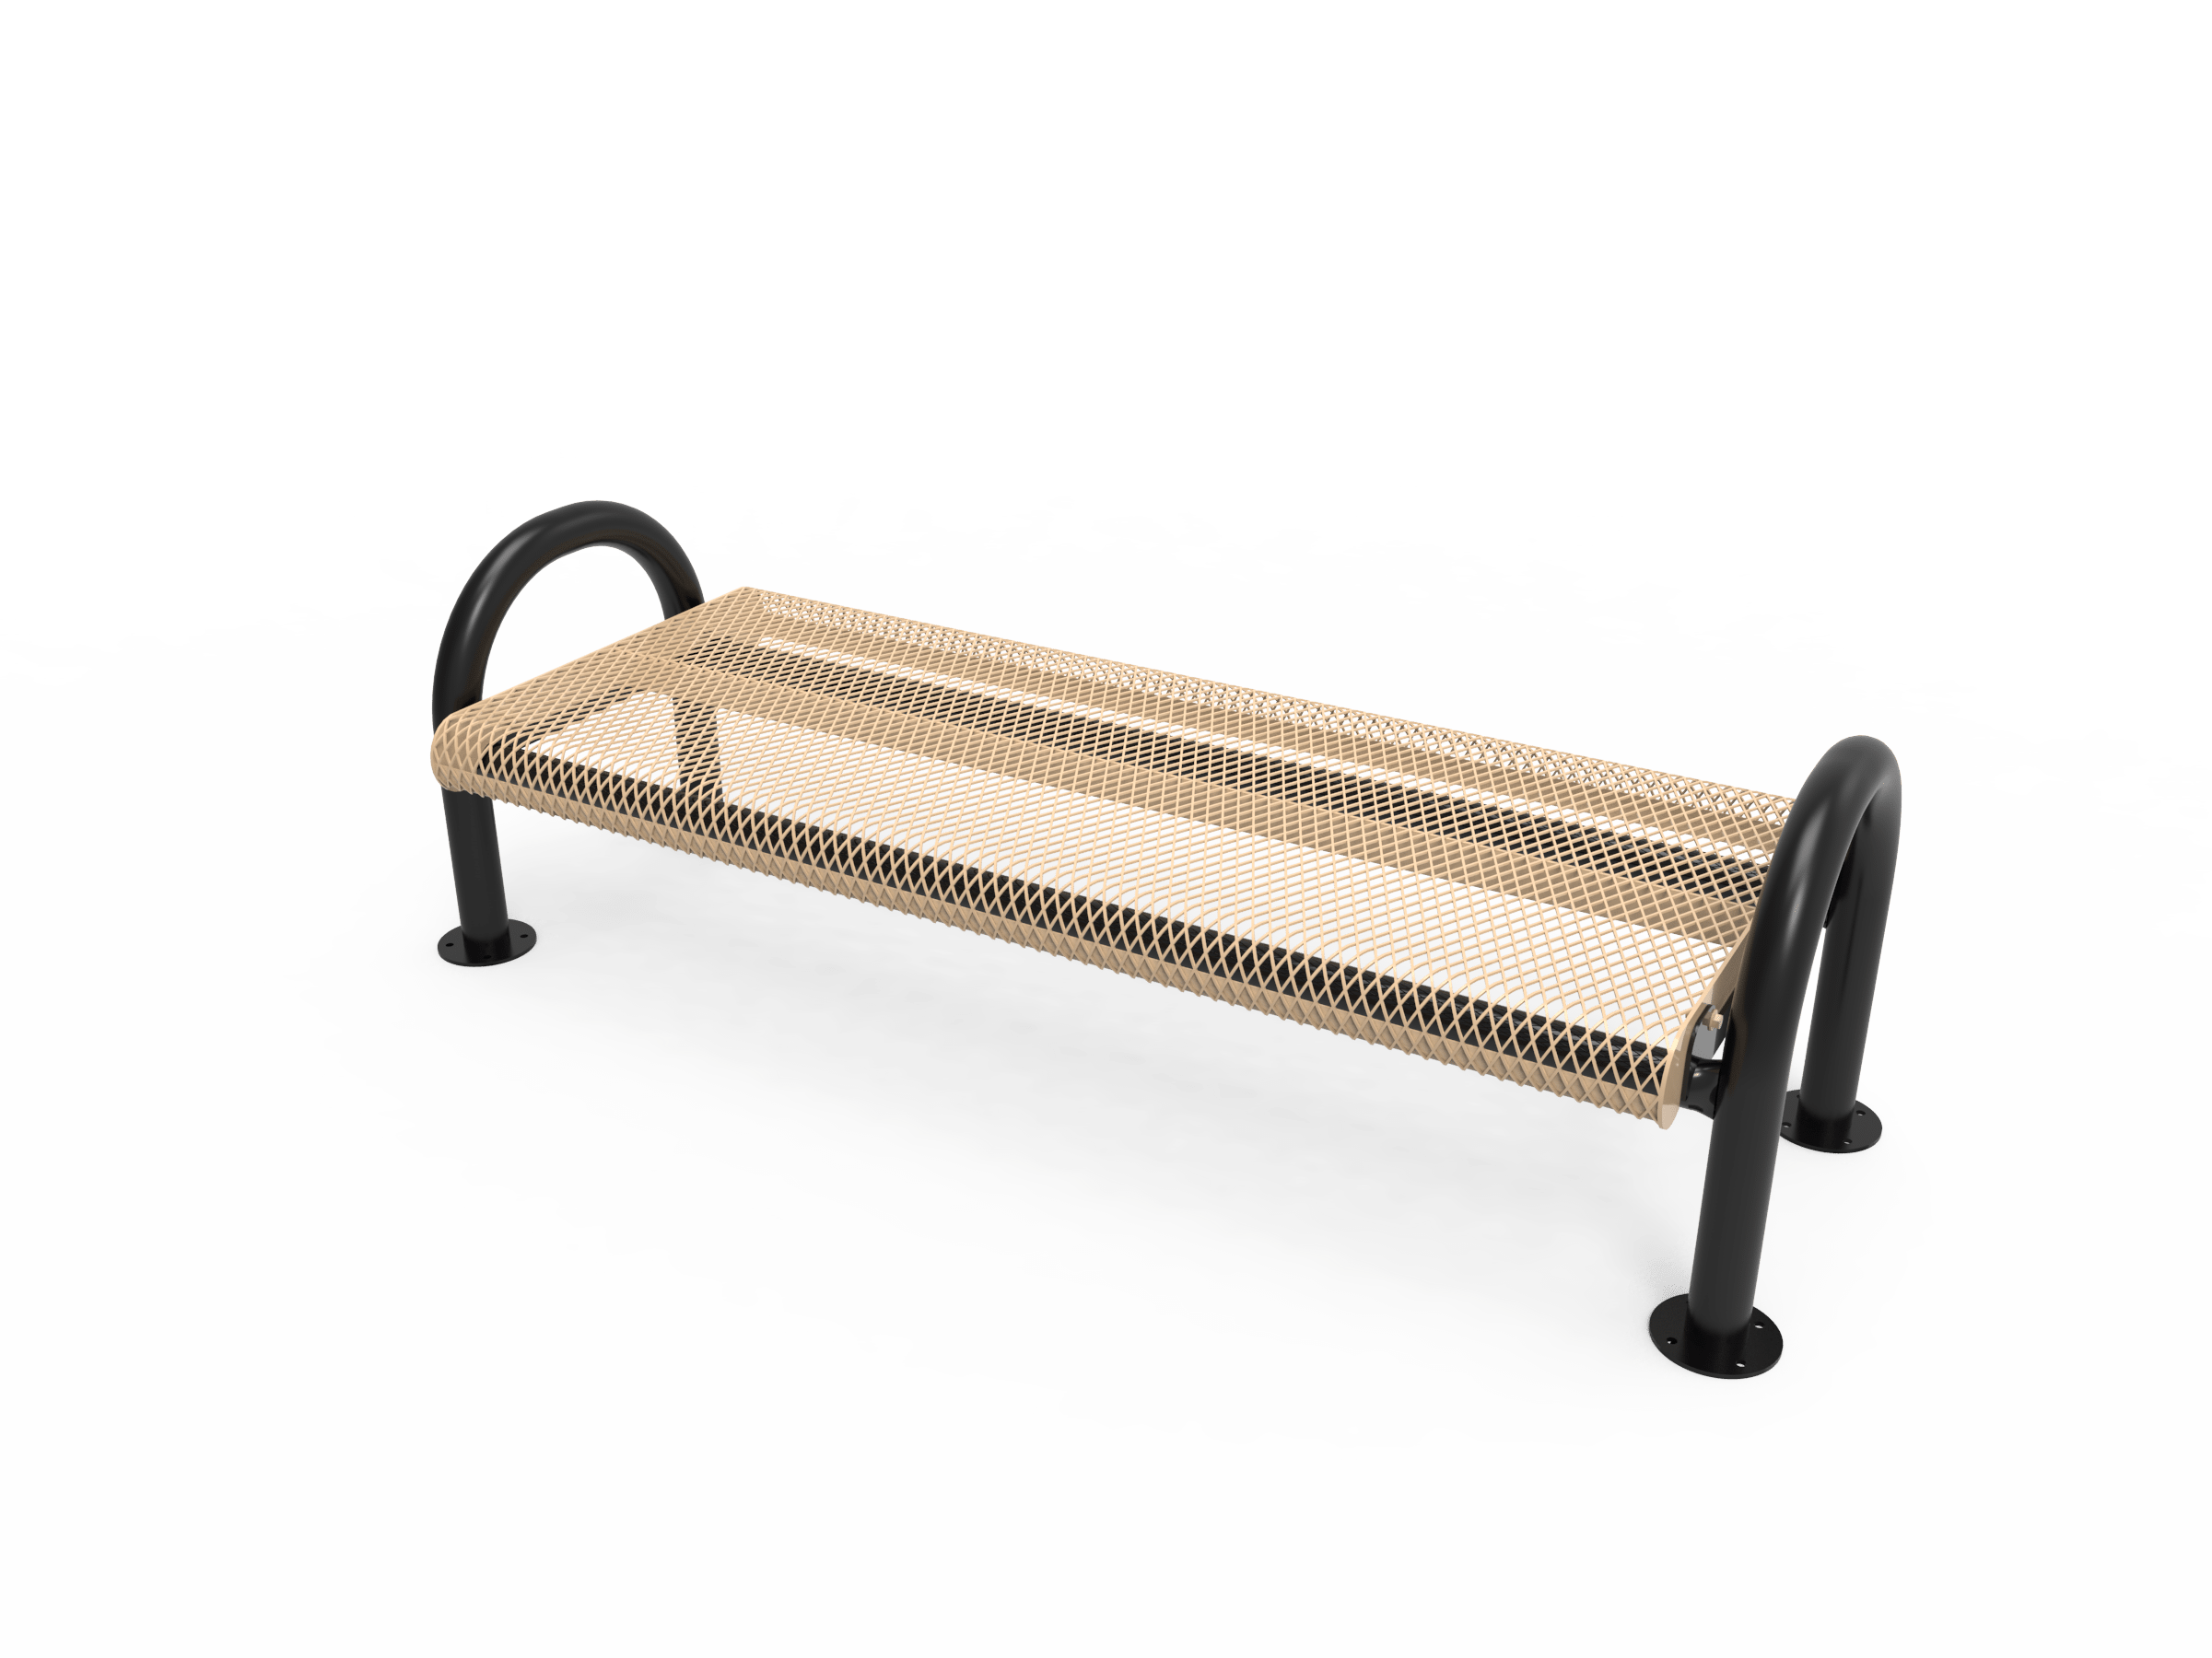 4′ Bench Without Back Surface-Mesh
BMD04-C-60-000
Industry Standard Finish
$789.00
BMD04-A-60-000
Advantage Premium Finish
$979.00
